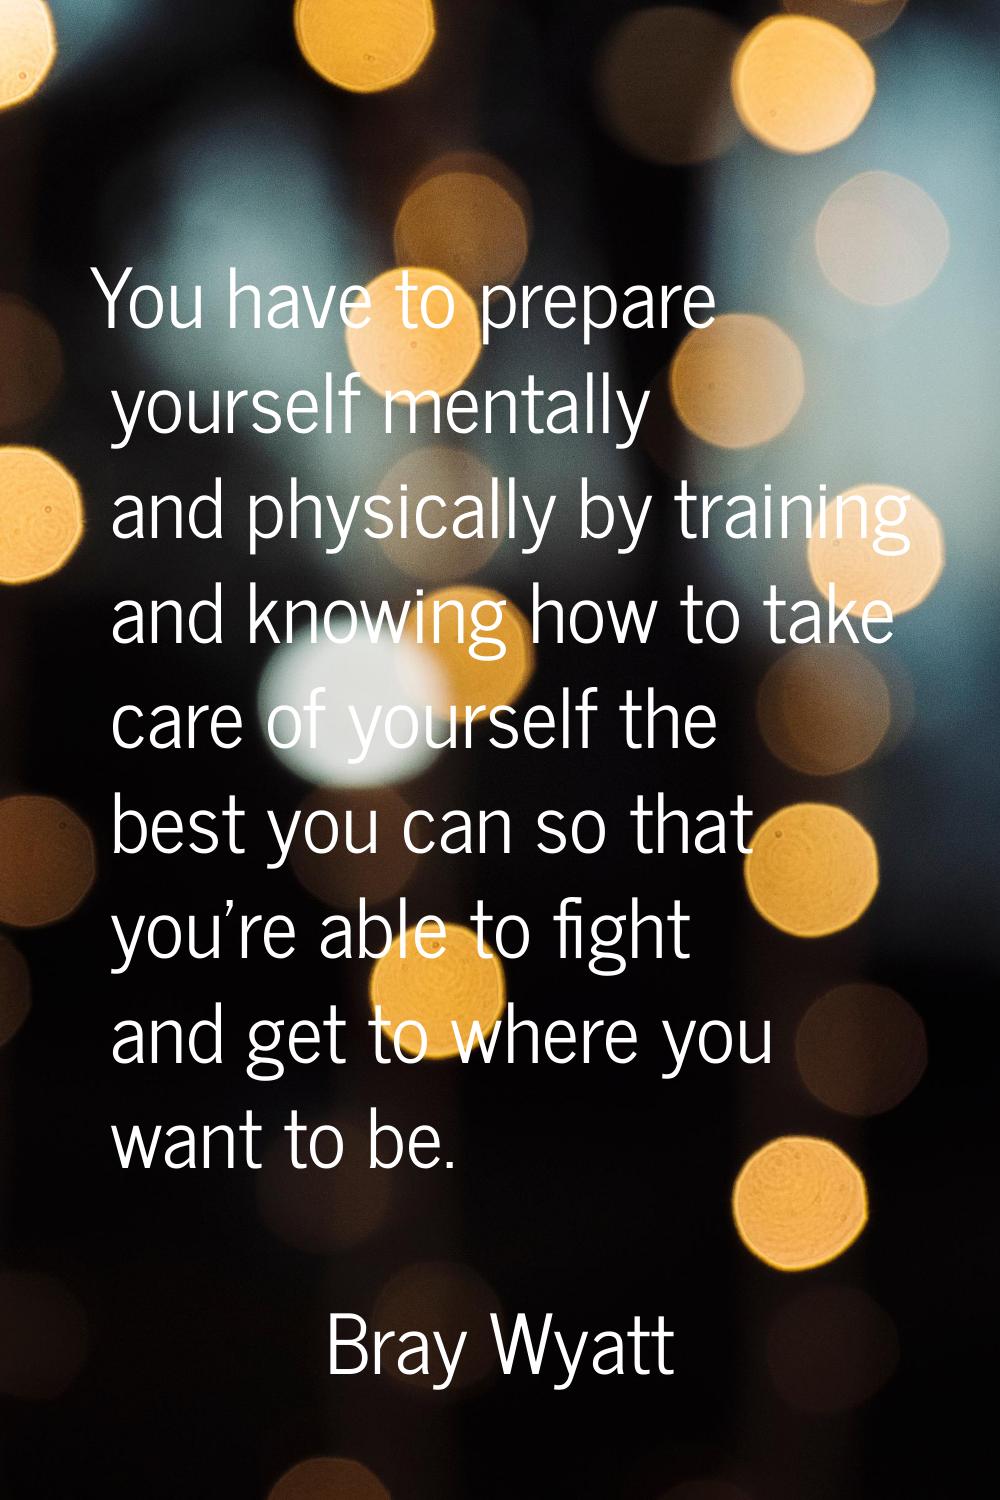 You have to prepare yourself mentally and physically by training and knowing how to take care of yo